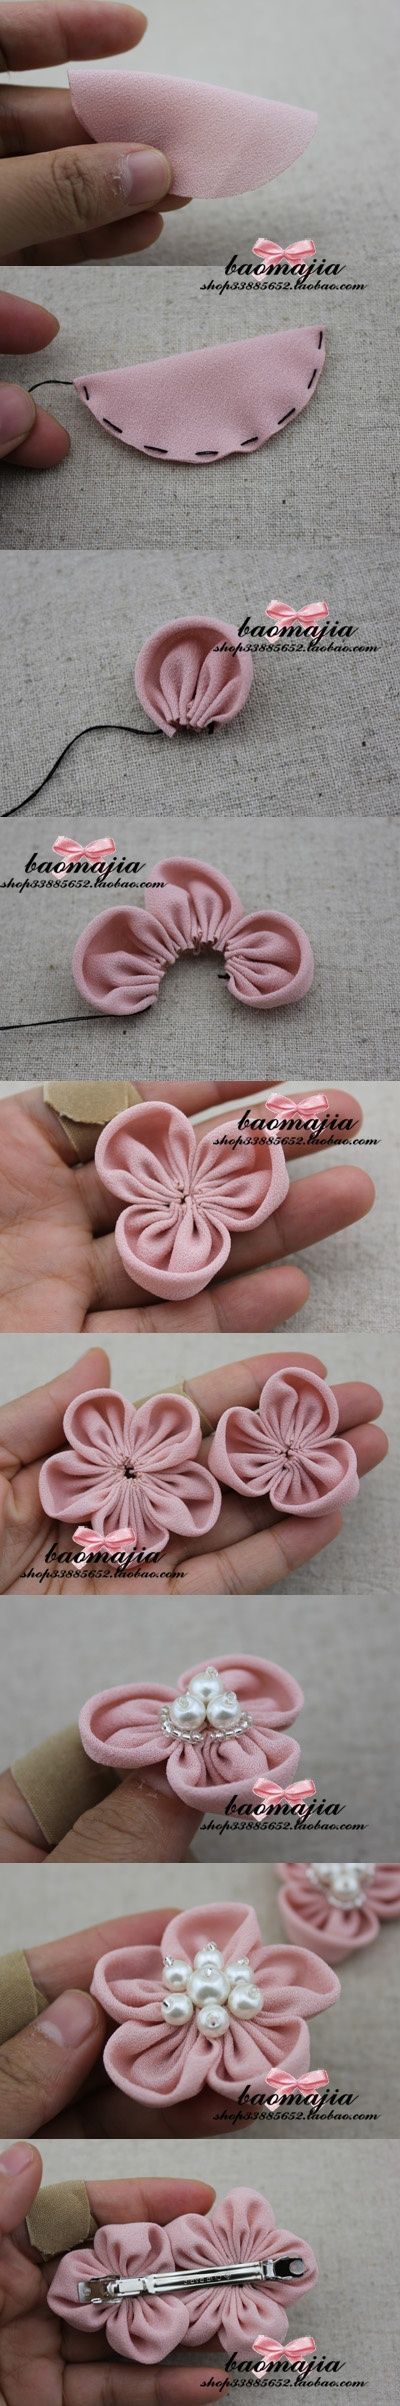 Cute and easy DIY fabric flower pins |